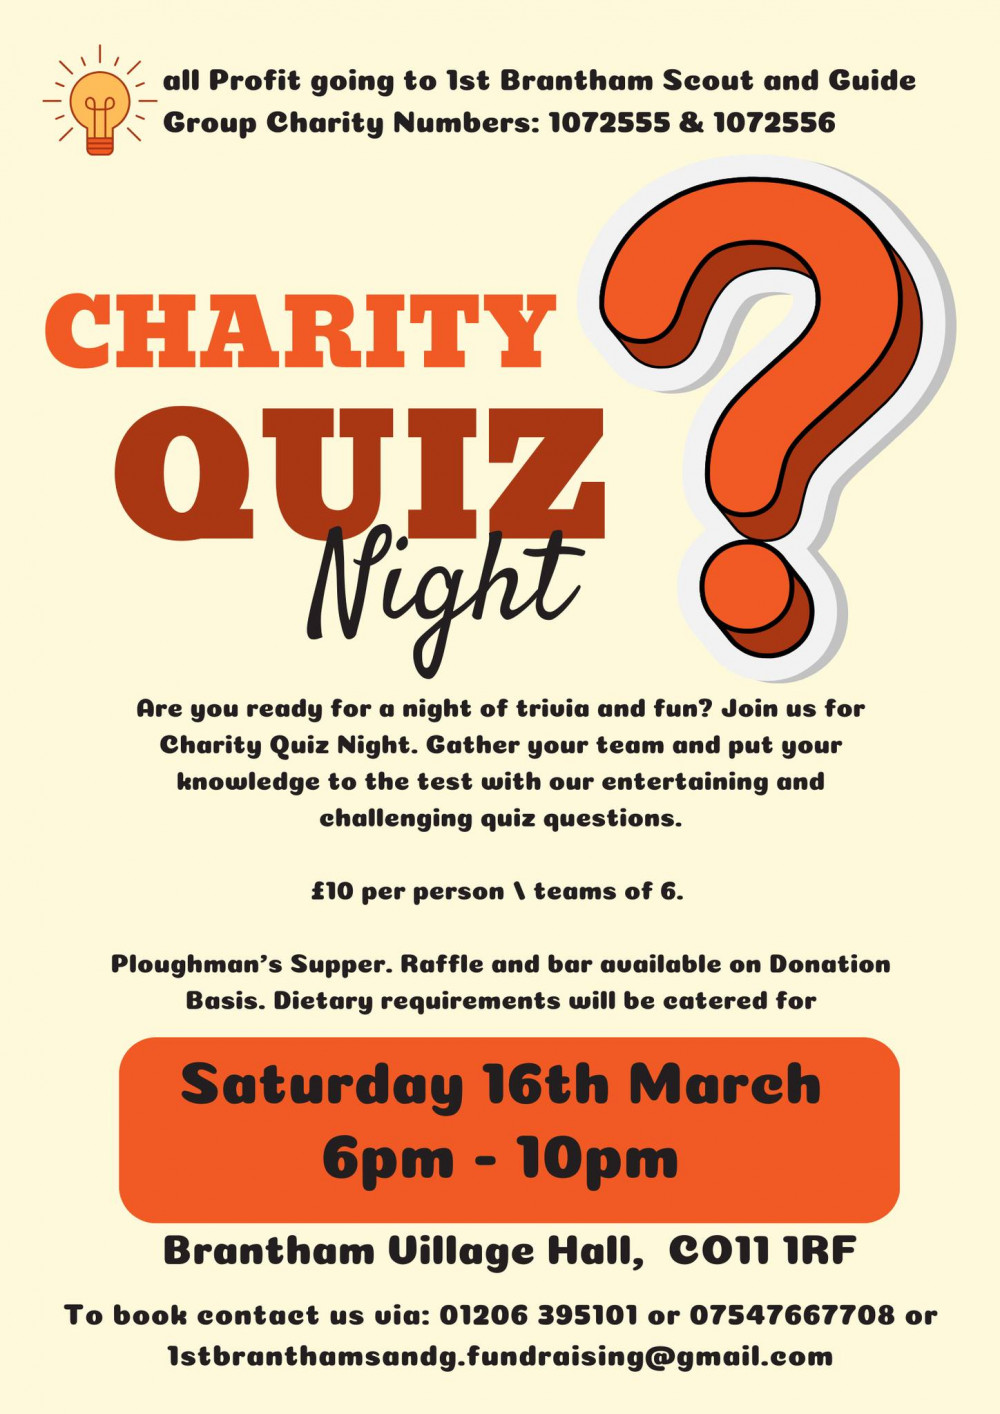 Scouts and Guides Charity Quiz Night